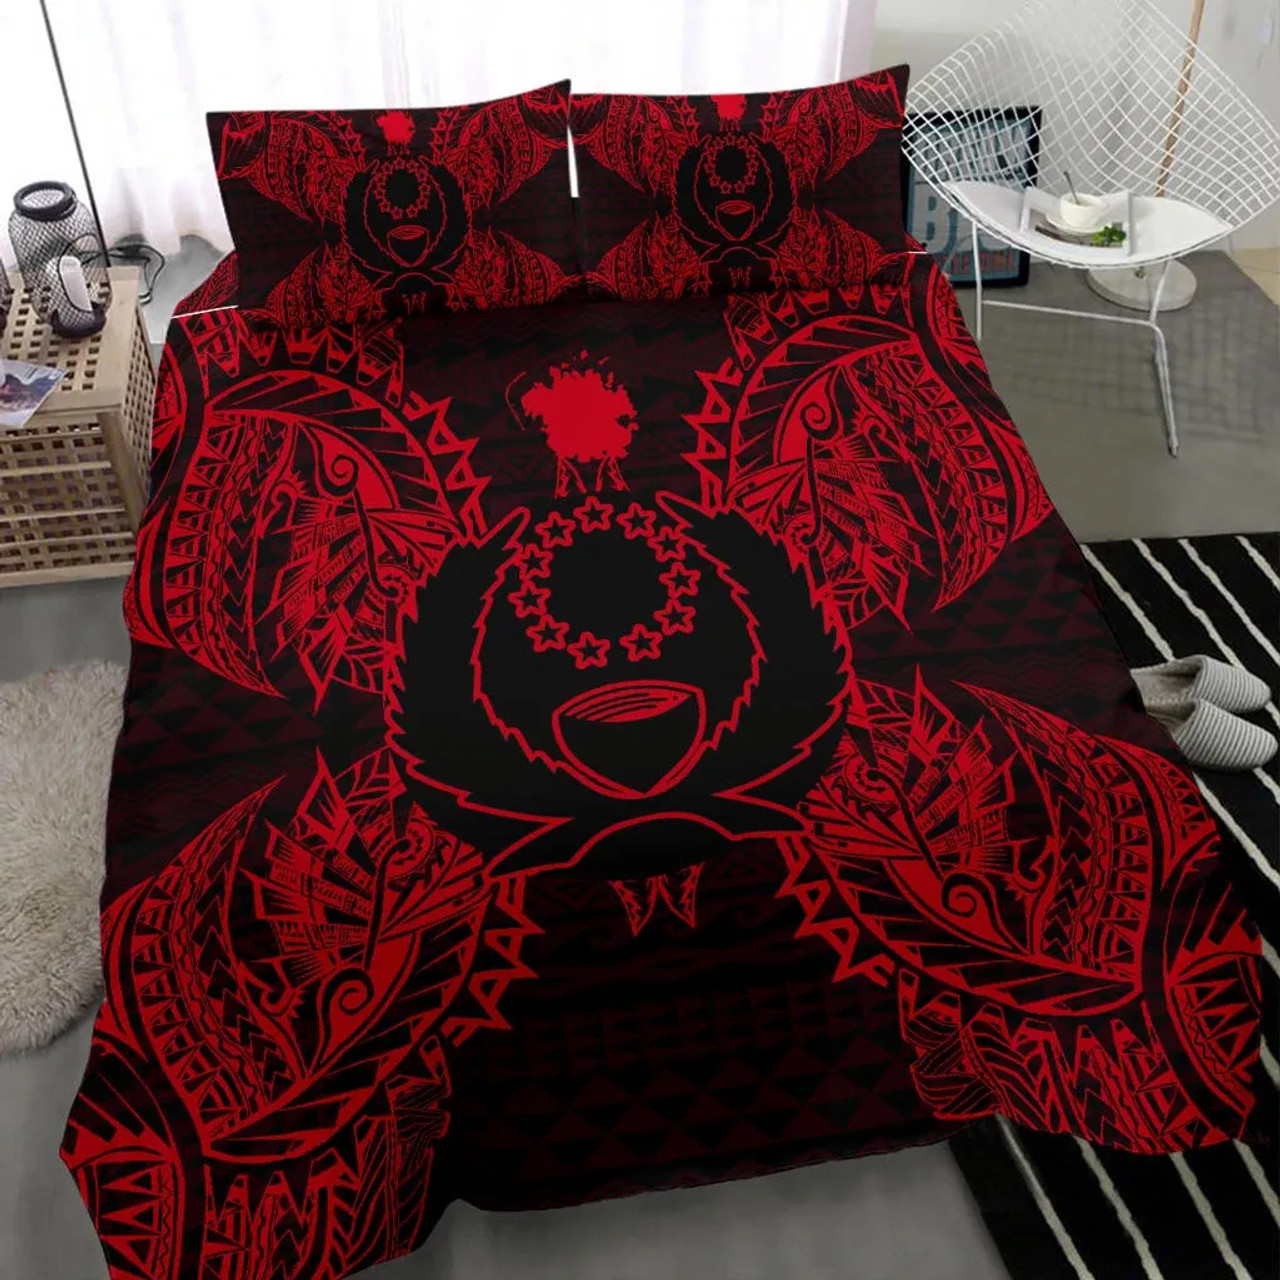 Pohnpei Micronesian Bedding Set - Red Tentacle Turtle 6